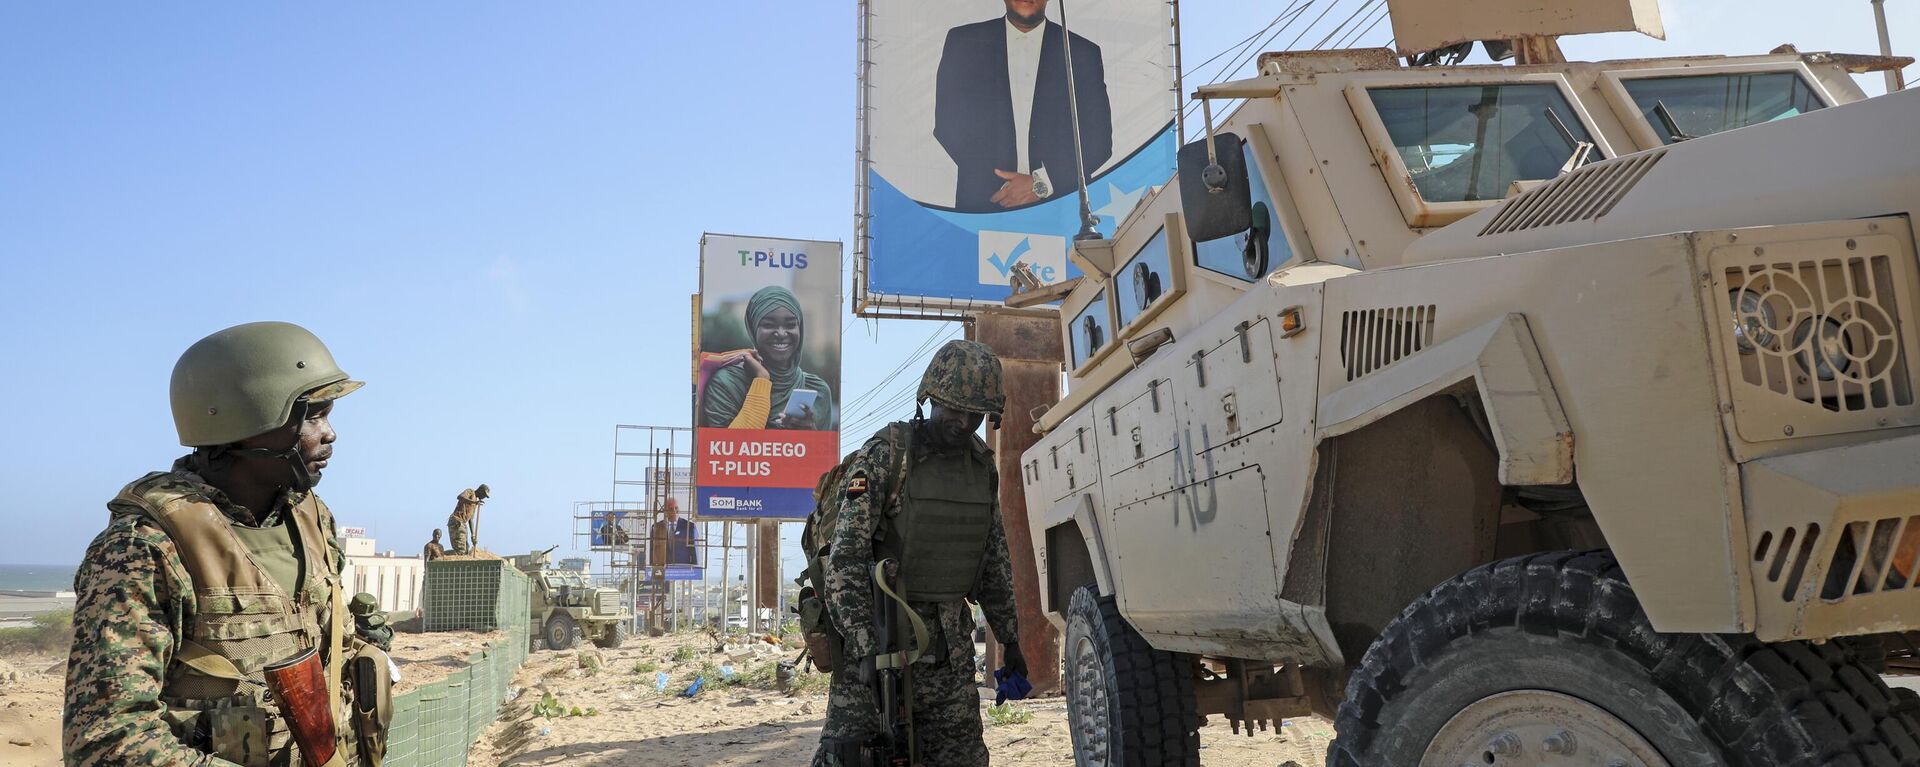 Ugandan peacekeepers with the African Transition Mission in Somalia (ATMIS) stand next to their armored vehicle, with a campaign poster for presidential candidate Ahmed Abdullahi Samow seen above, on a street in Mogadishu, Somalia Tuesday, May 10, 2022 - Sputnik Africa, 1920, 03.04.2023